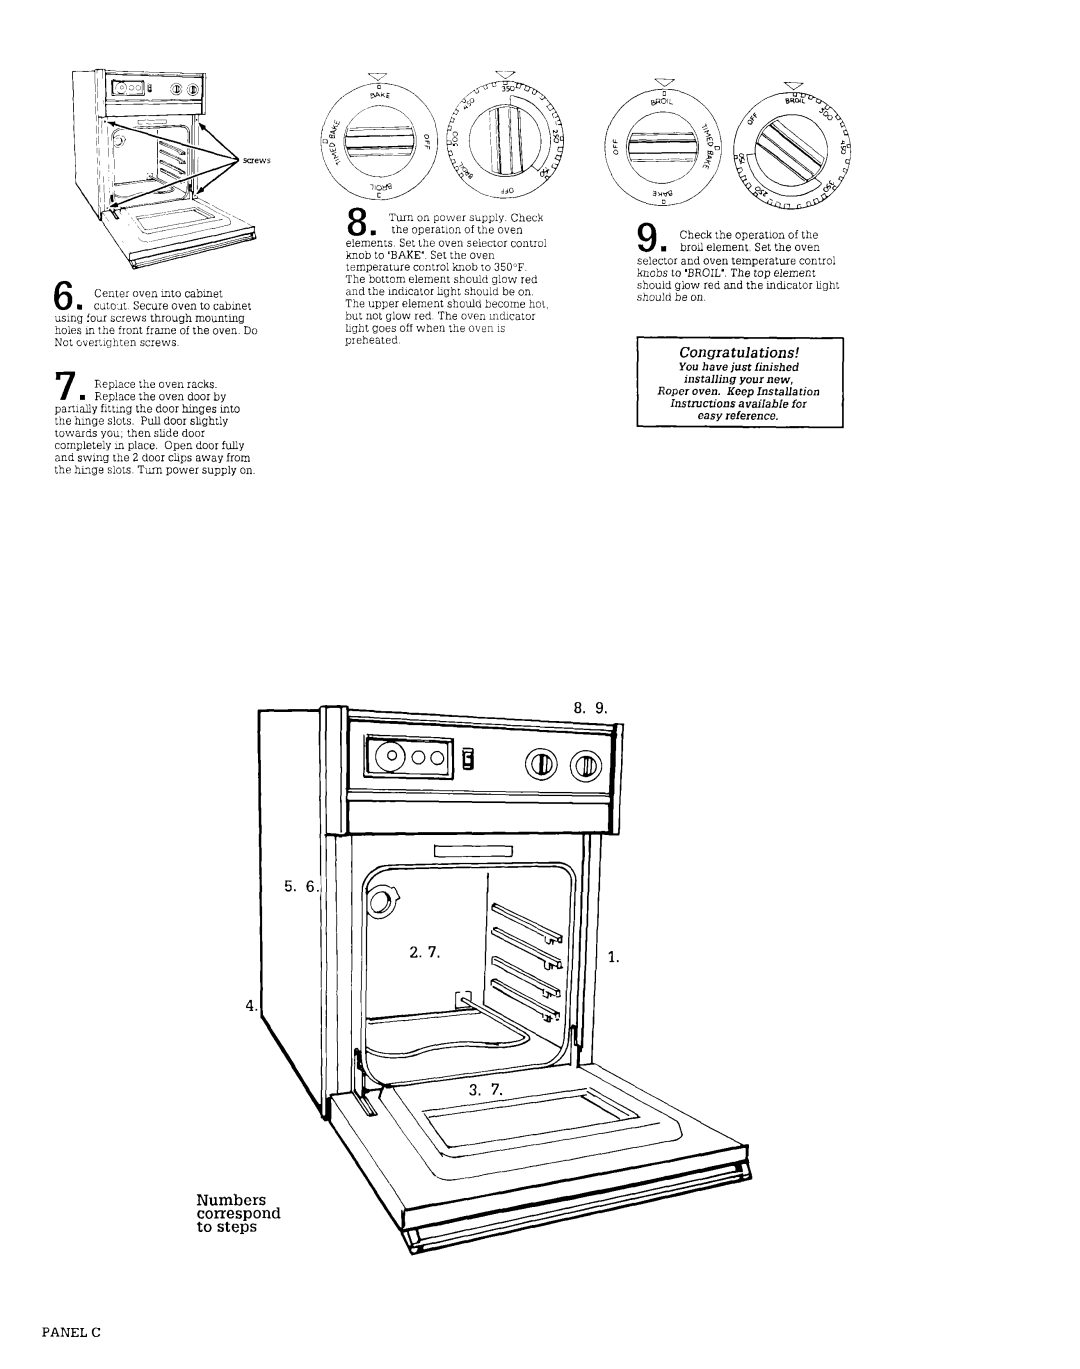 Roper Convection Oven installation instructions Center oven mto cabmet 